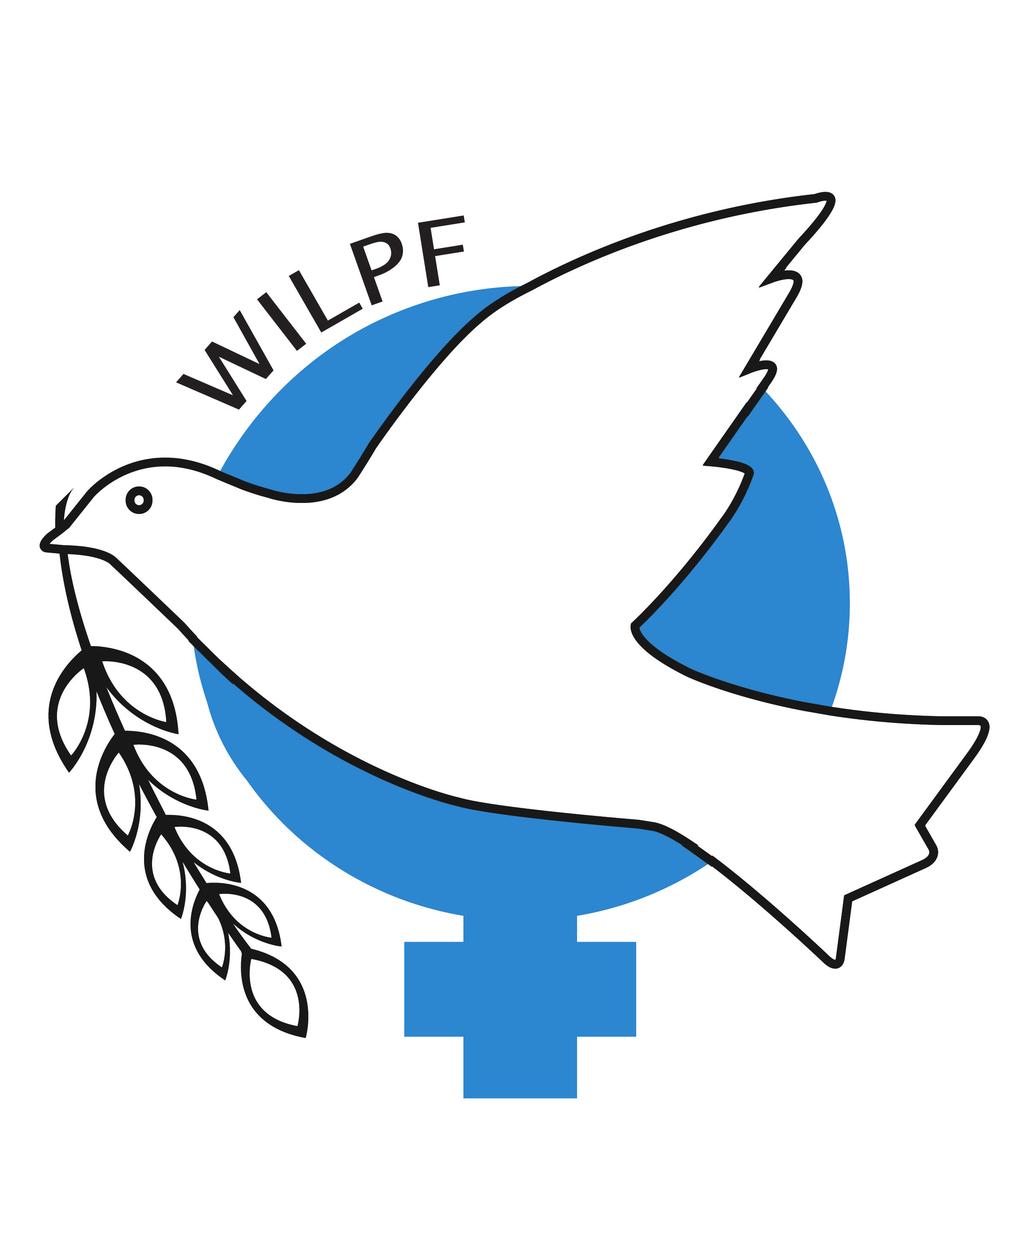 WILPF RESOLUTIONS 18th Congress New Delhi, India 28 December 1970-2 January 1971 The Women s International League for Peace and Freedom welcomes the designation by the United Nations of the 1970s as